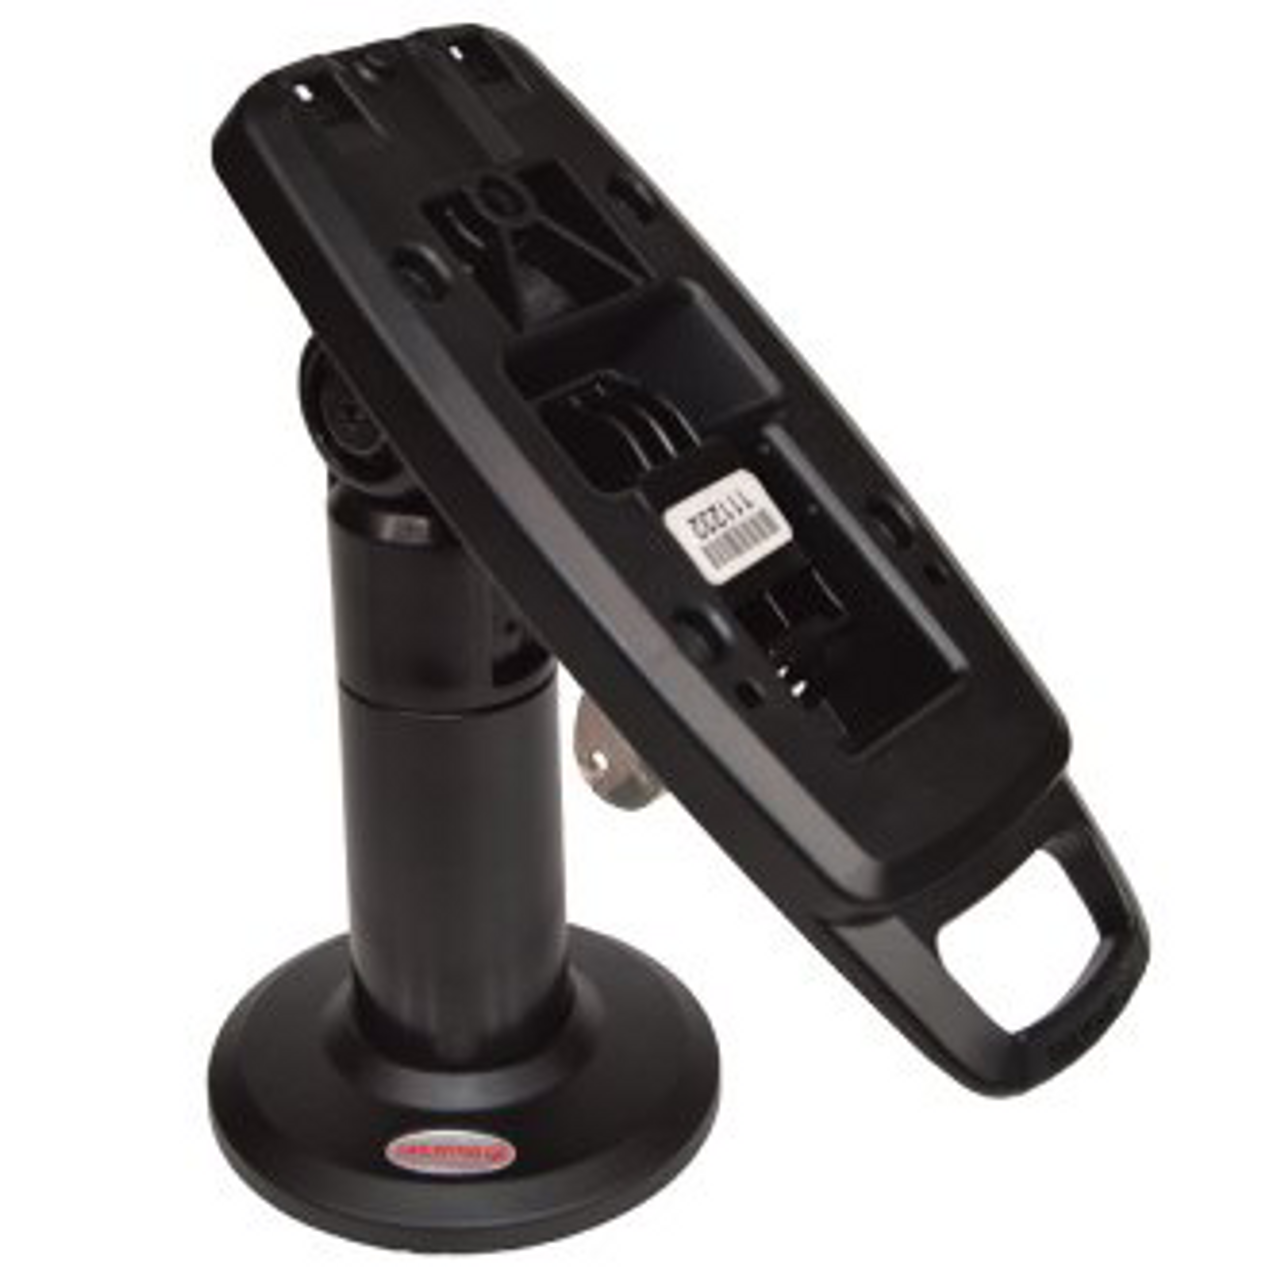 Tailwind FlexiPole SafeBase Compact Stand for PAX S300